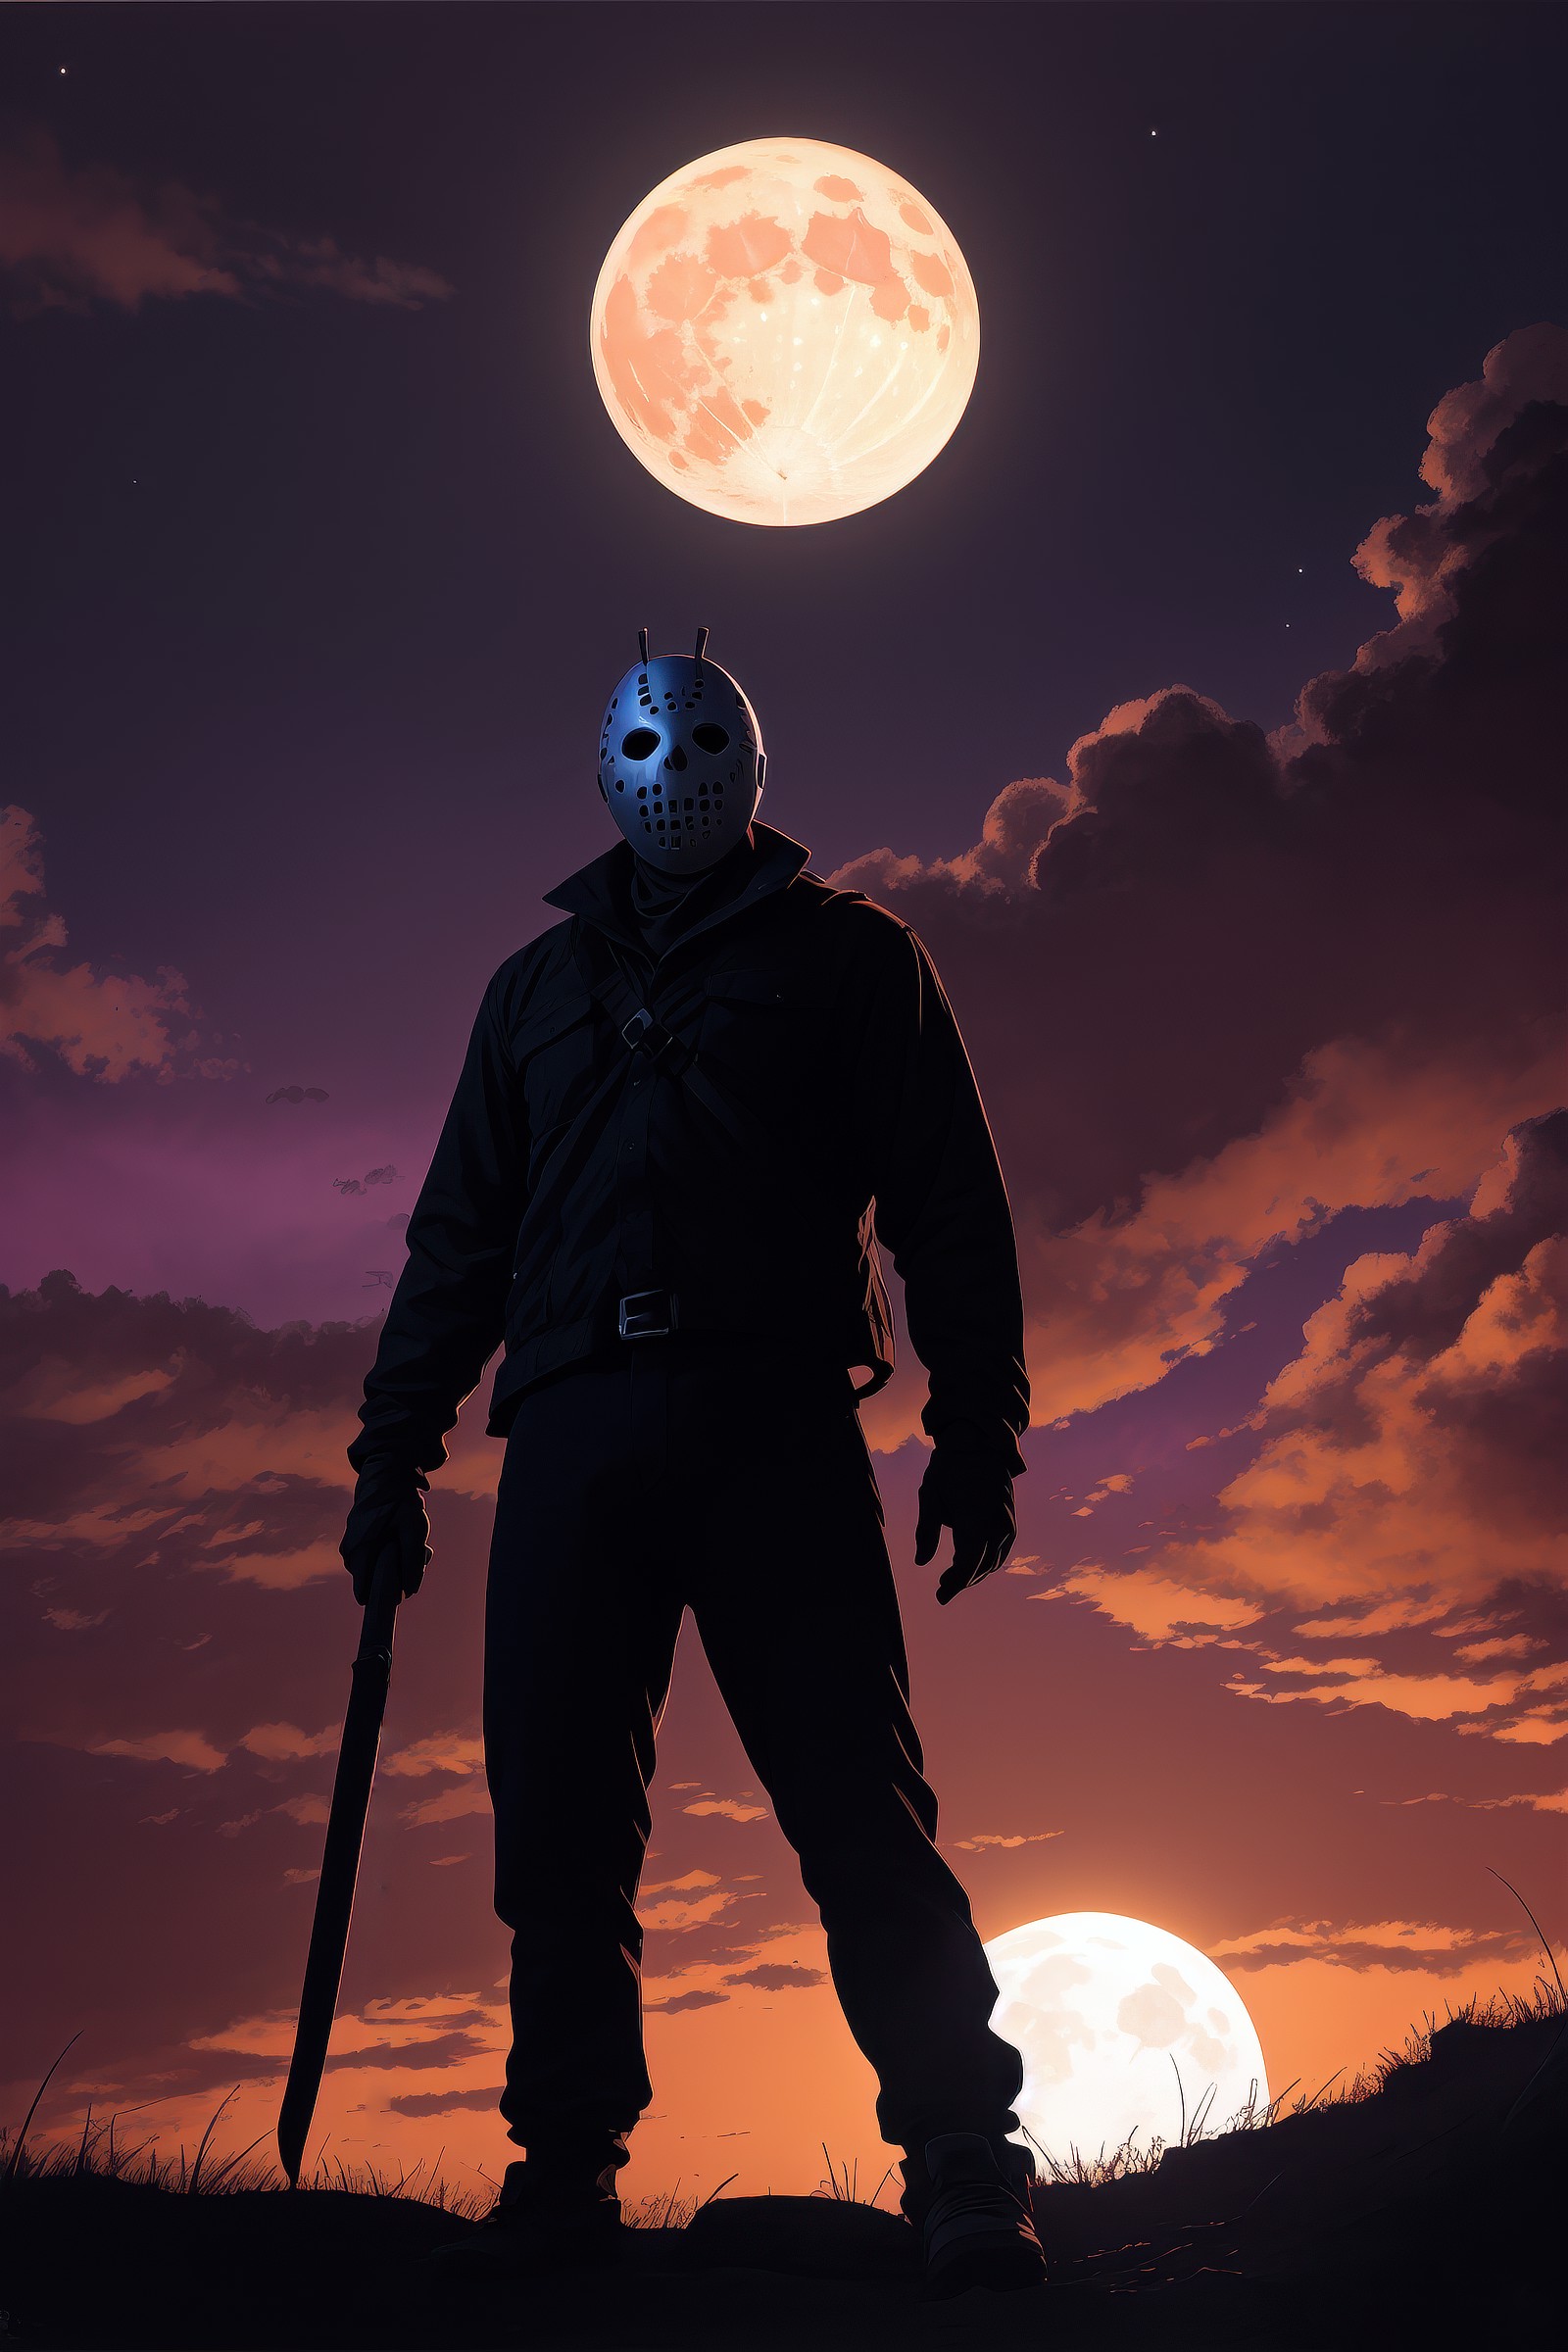 very scary jason voorhees! standing on a giant hill, new york panorama in far background, powerful pose, scary, horror, de...